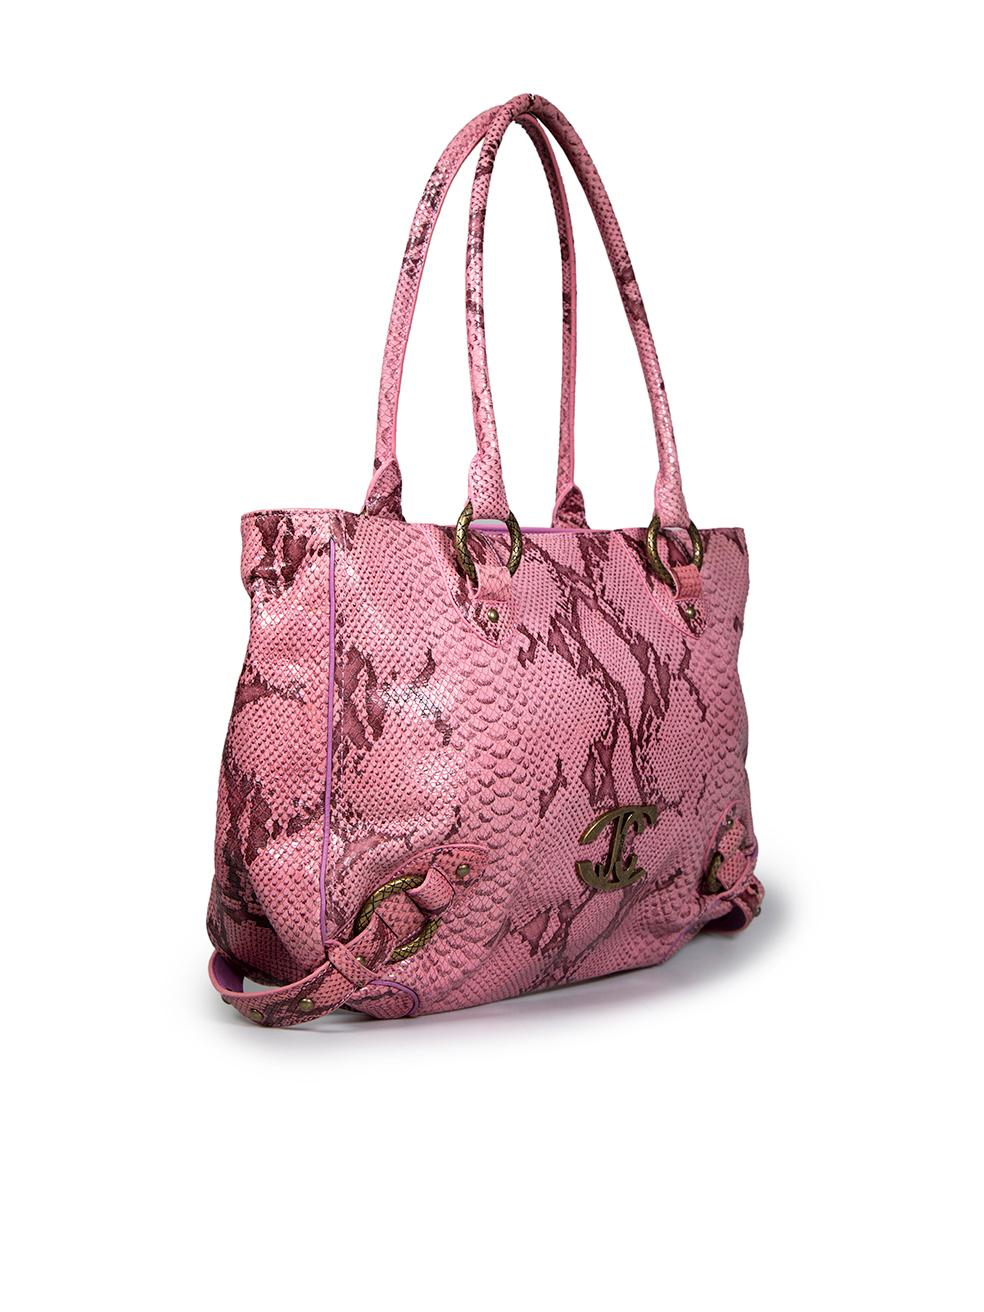 CONDITION is Very good. Minimal wear to bag is evident. Minimal wear to buckle edges at base corners on this used Roberto Cavalli Just Cavalli designer resale item.
 
 
 
 Details
 
 
 Pink
 
 Leather
 
 Medium shoulder bag
 
 Snakeskin embossed